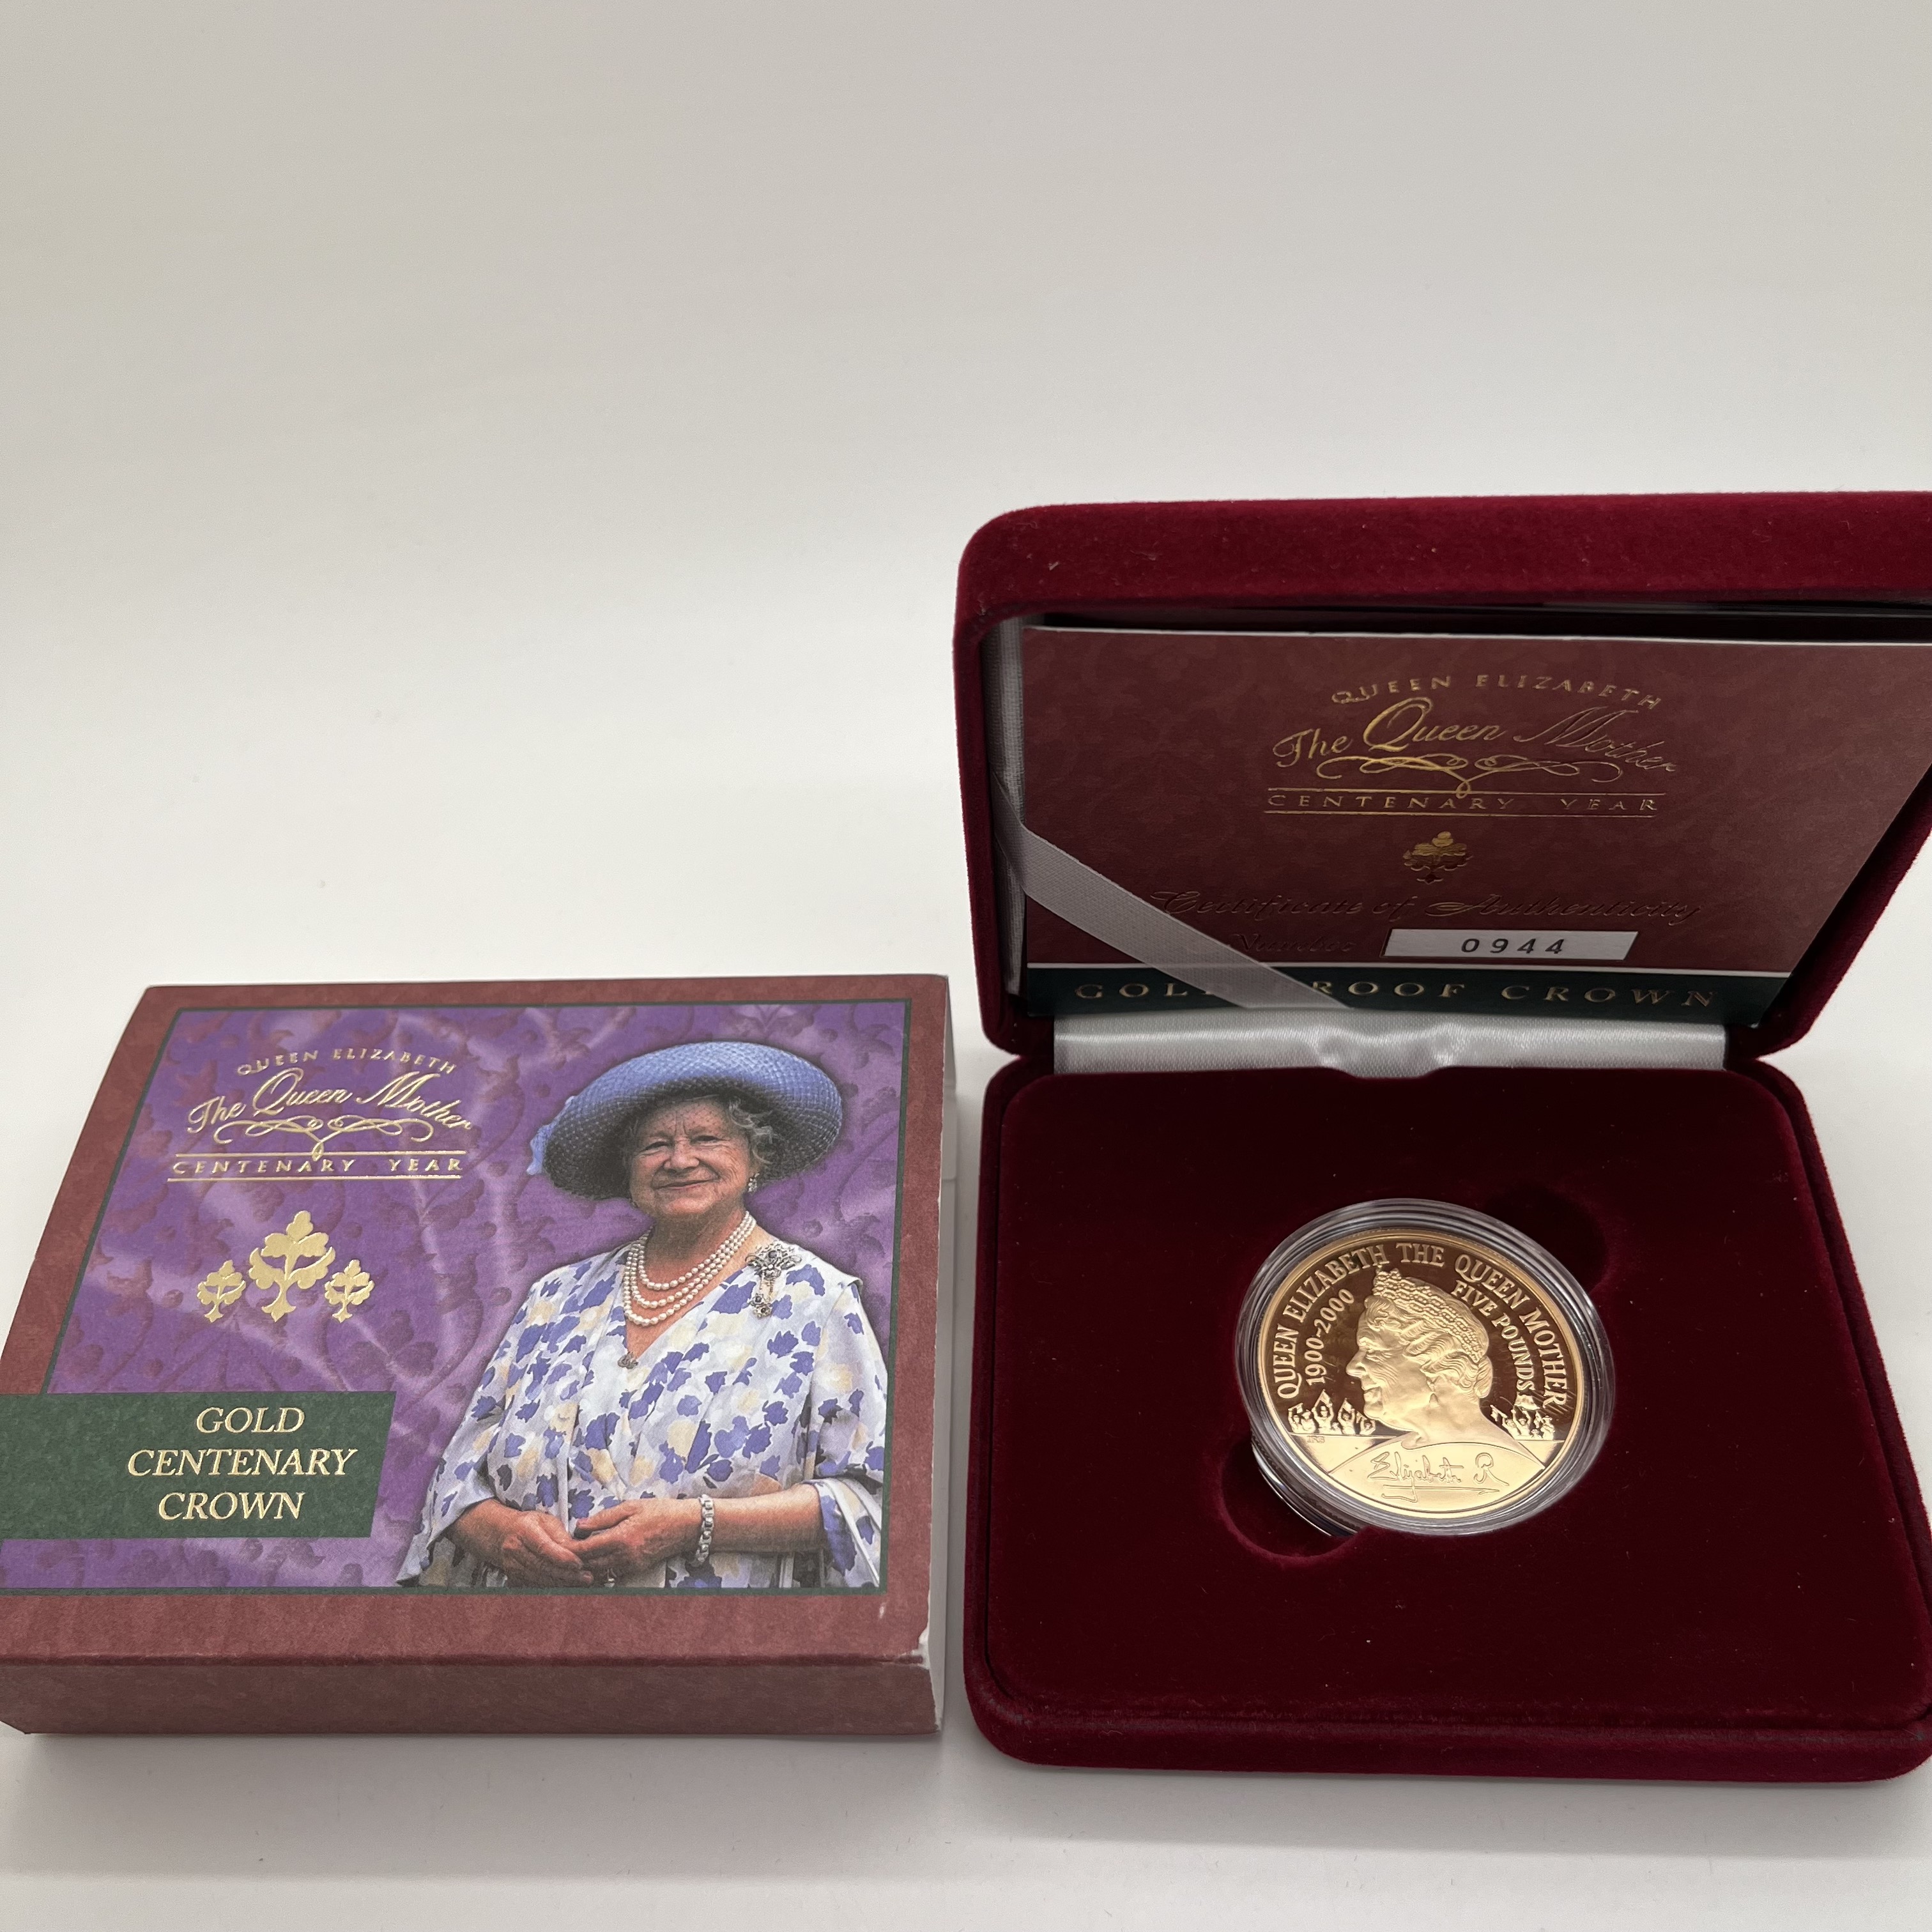 Royal Mint 2000 Gold Proof Queen Mother Centenary £5 Coin, cased with certificate of authenticity